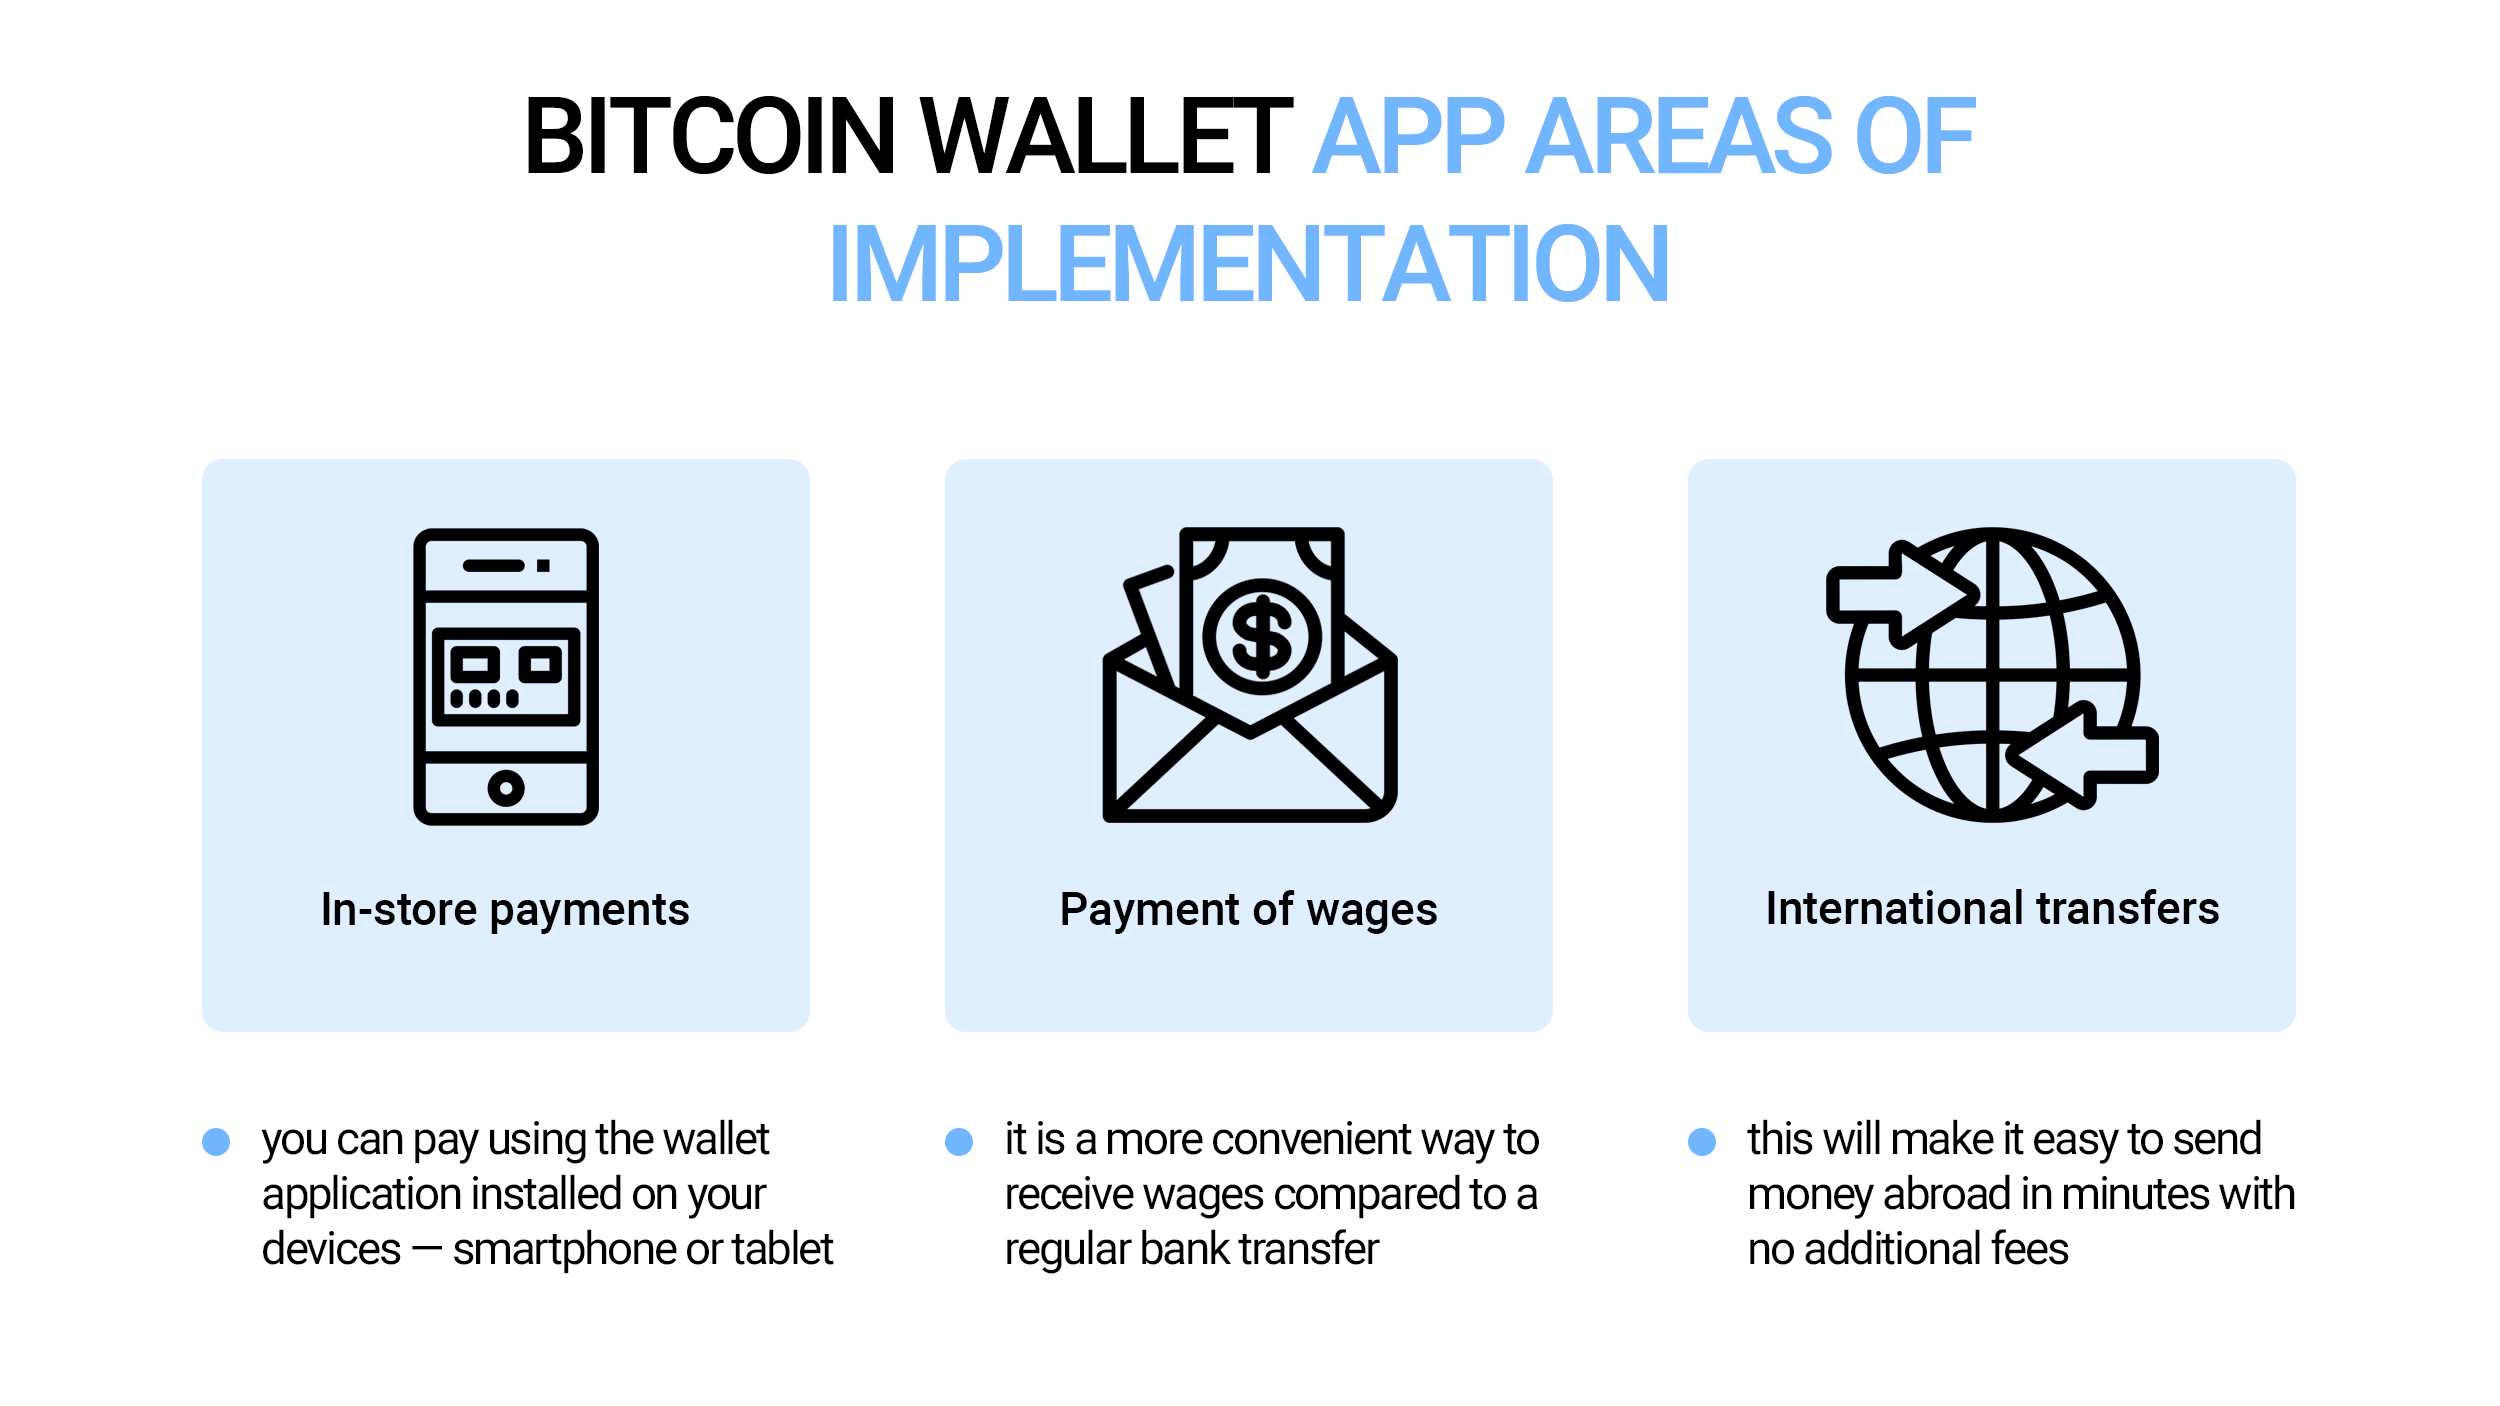 Bitcoin wallet app areas of implementation